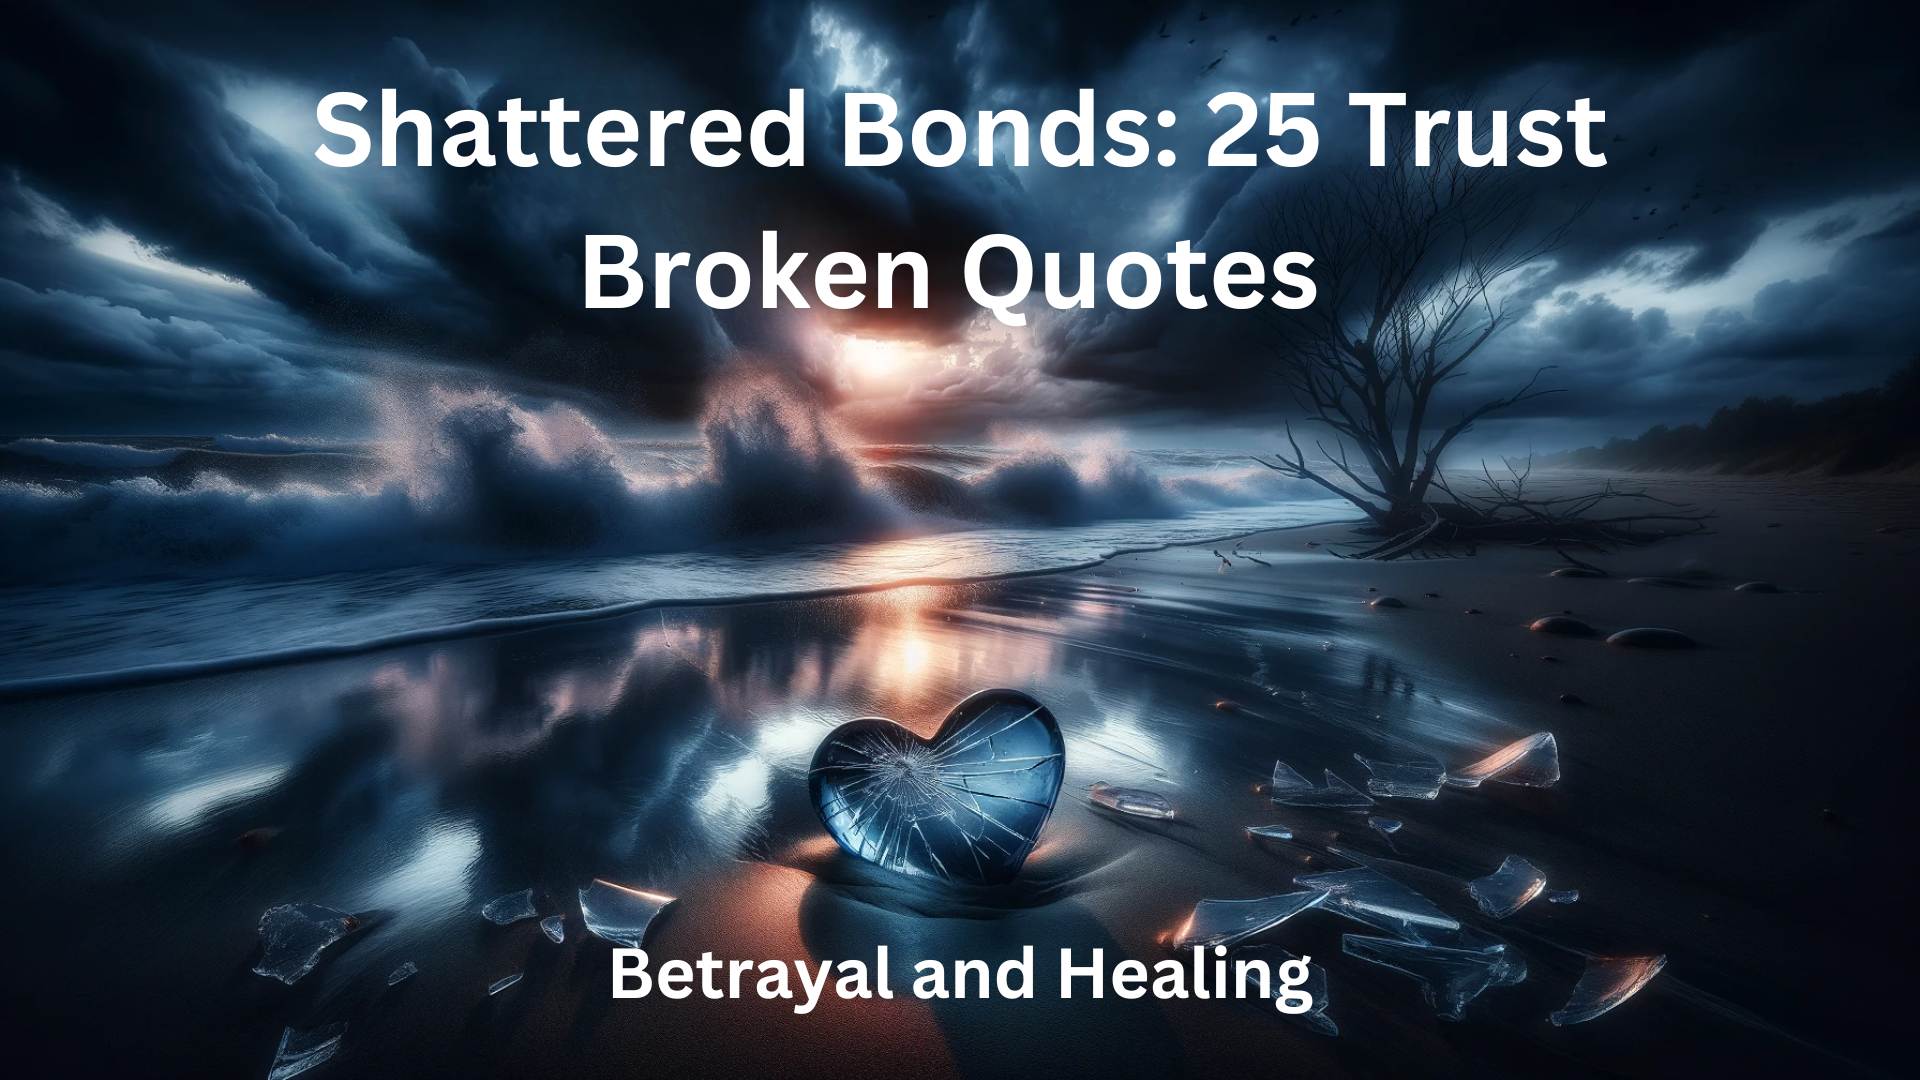 You are currently viewing Shattered Bonds: 25 Trust Broken Quotes on Betrayal and Healing